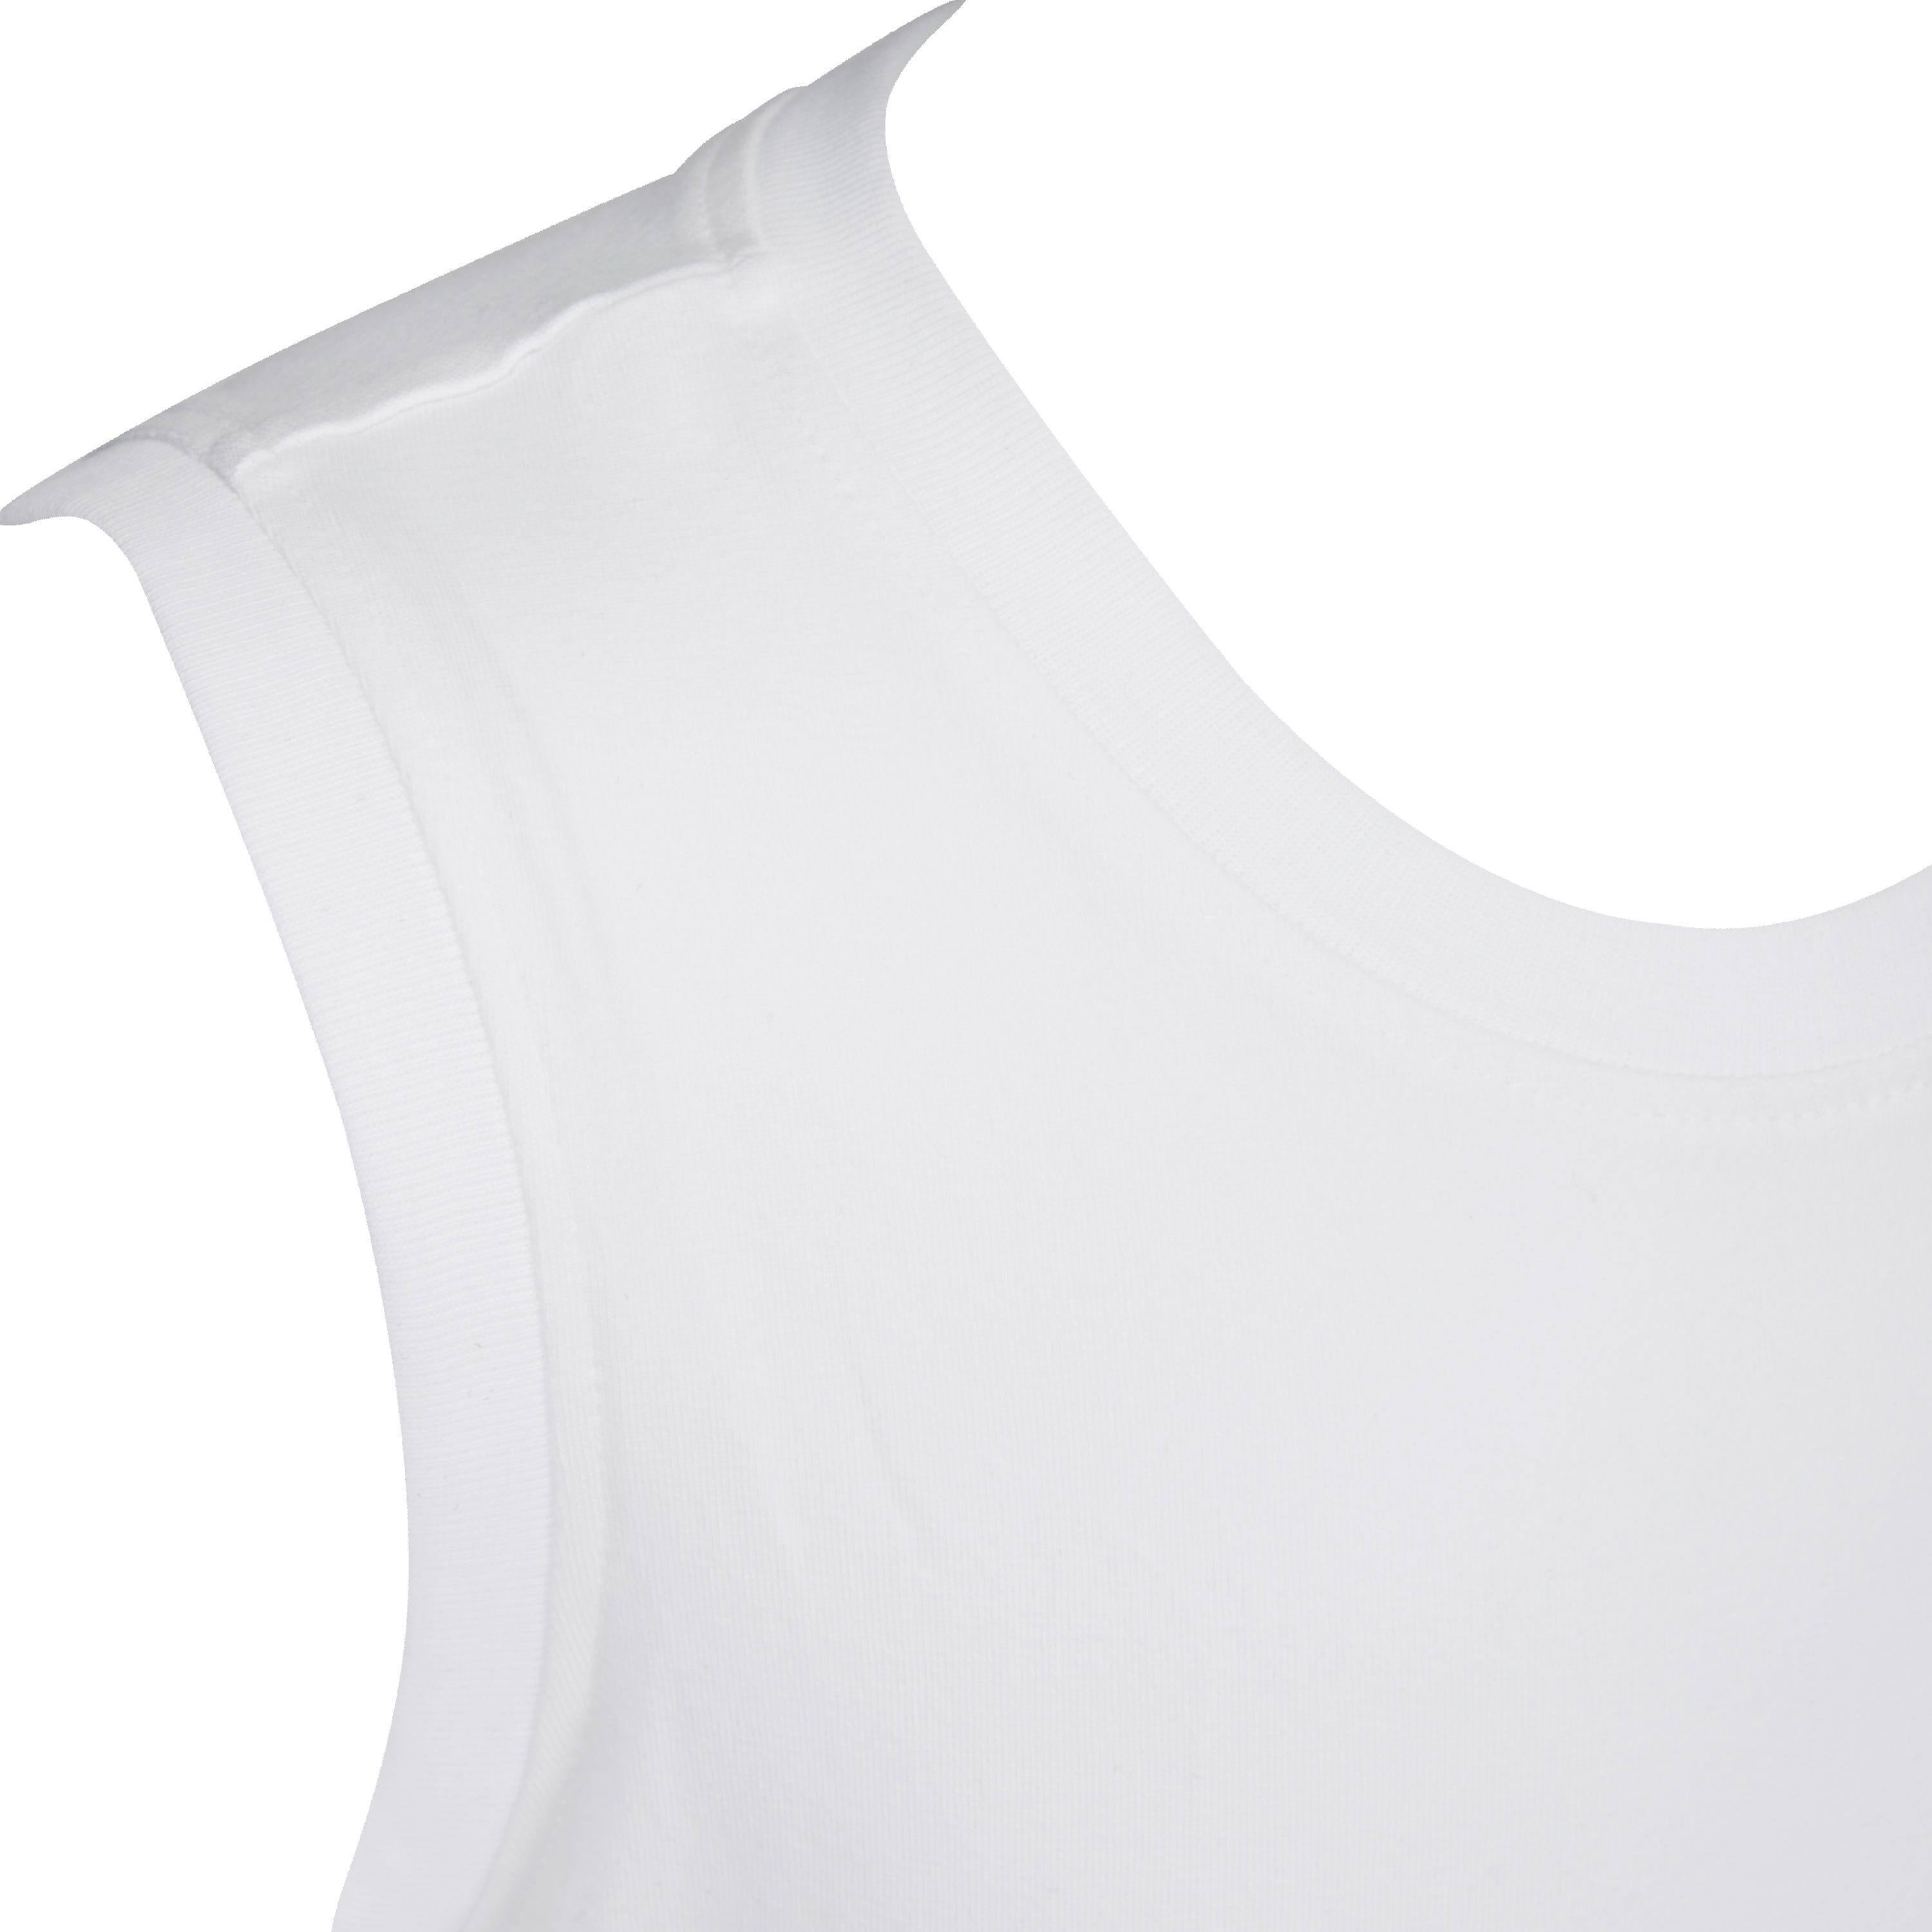 KayCey®P Super Soft Bodysuits - Sleeveless with Tube Access - Kids